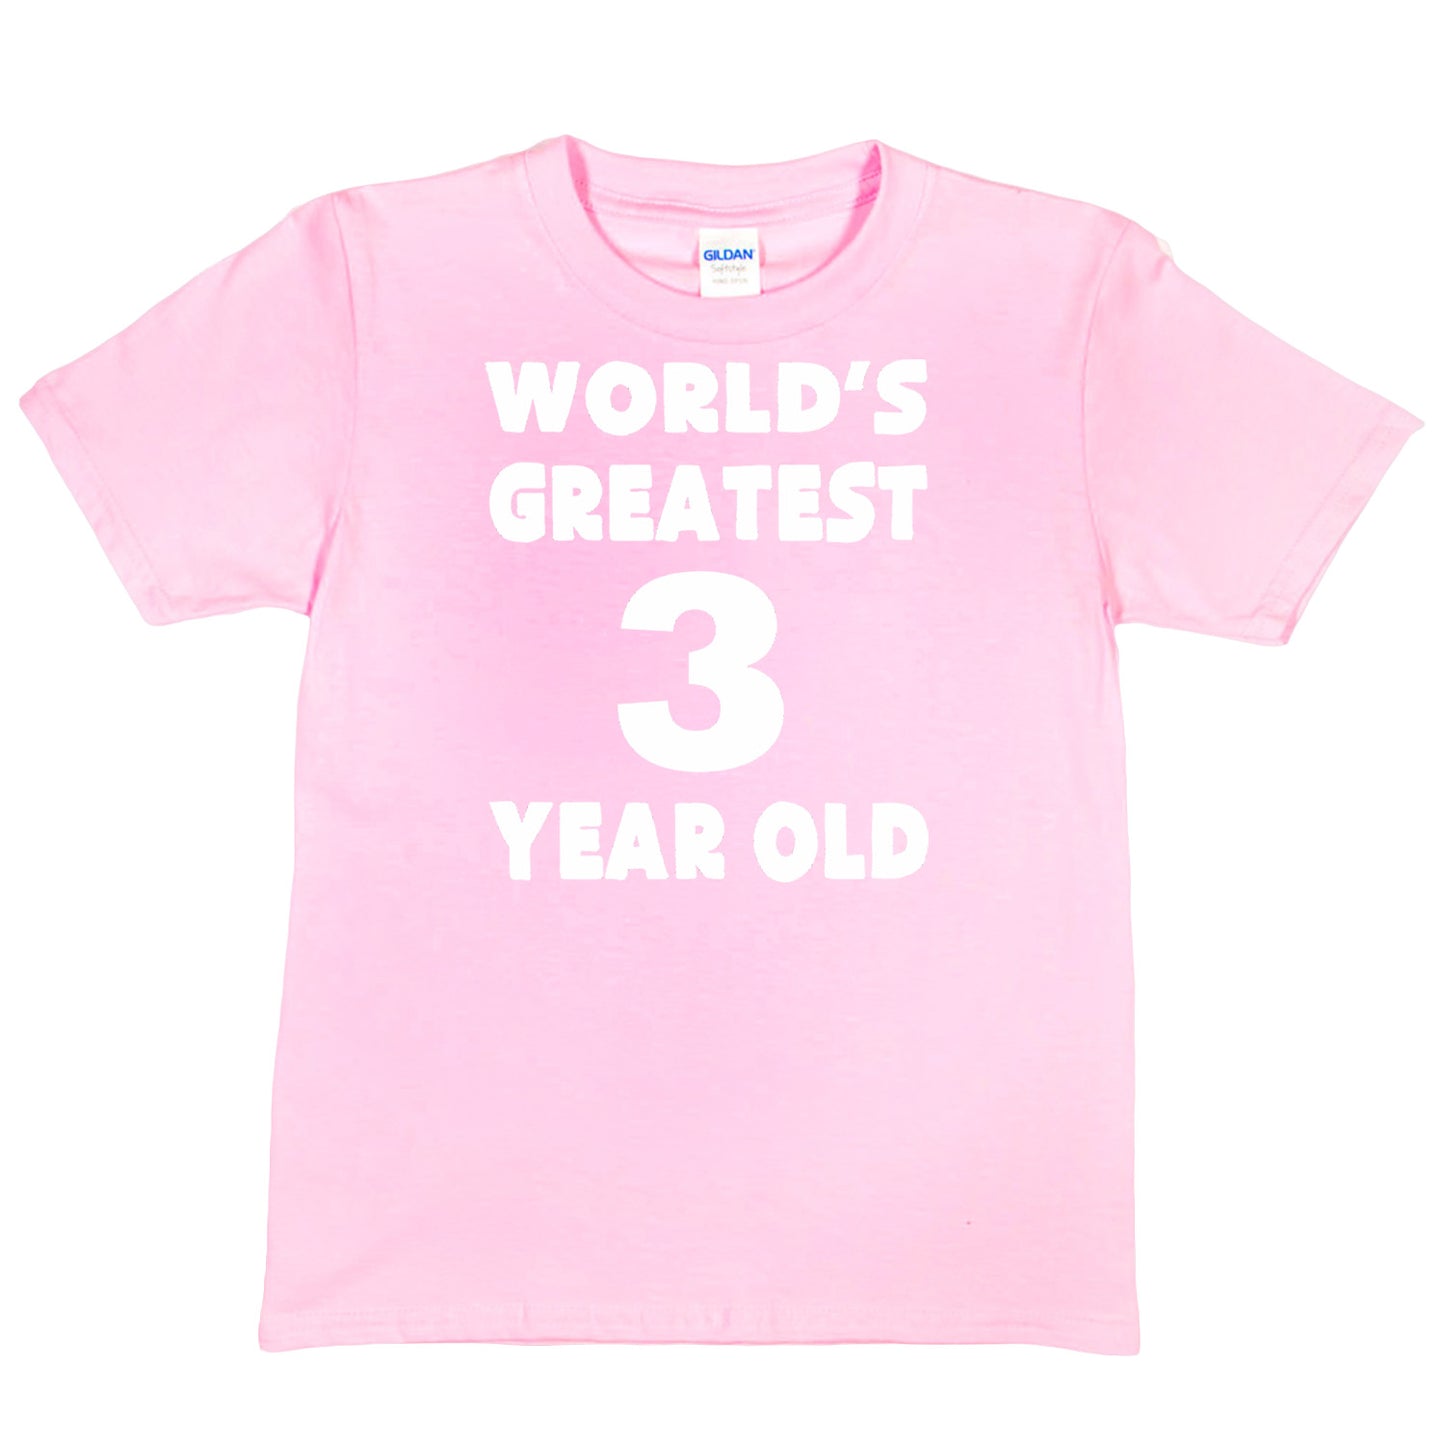 3rd Birthday T-shirt Worlds Greatest 3 Year Old Happy Birthday Tee Age 3 Gift